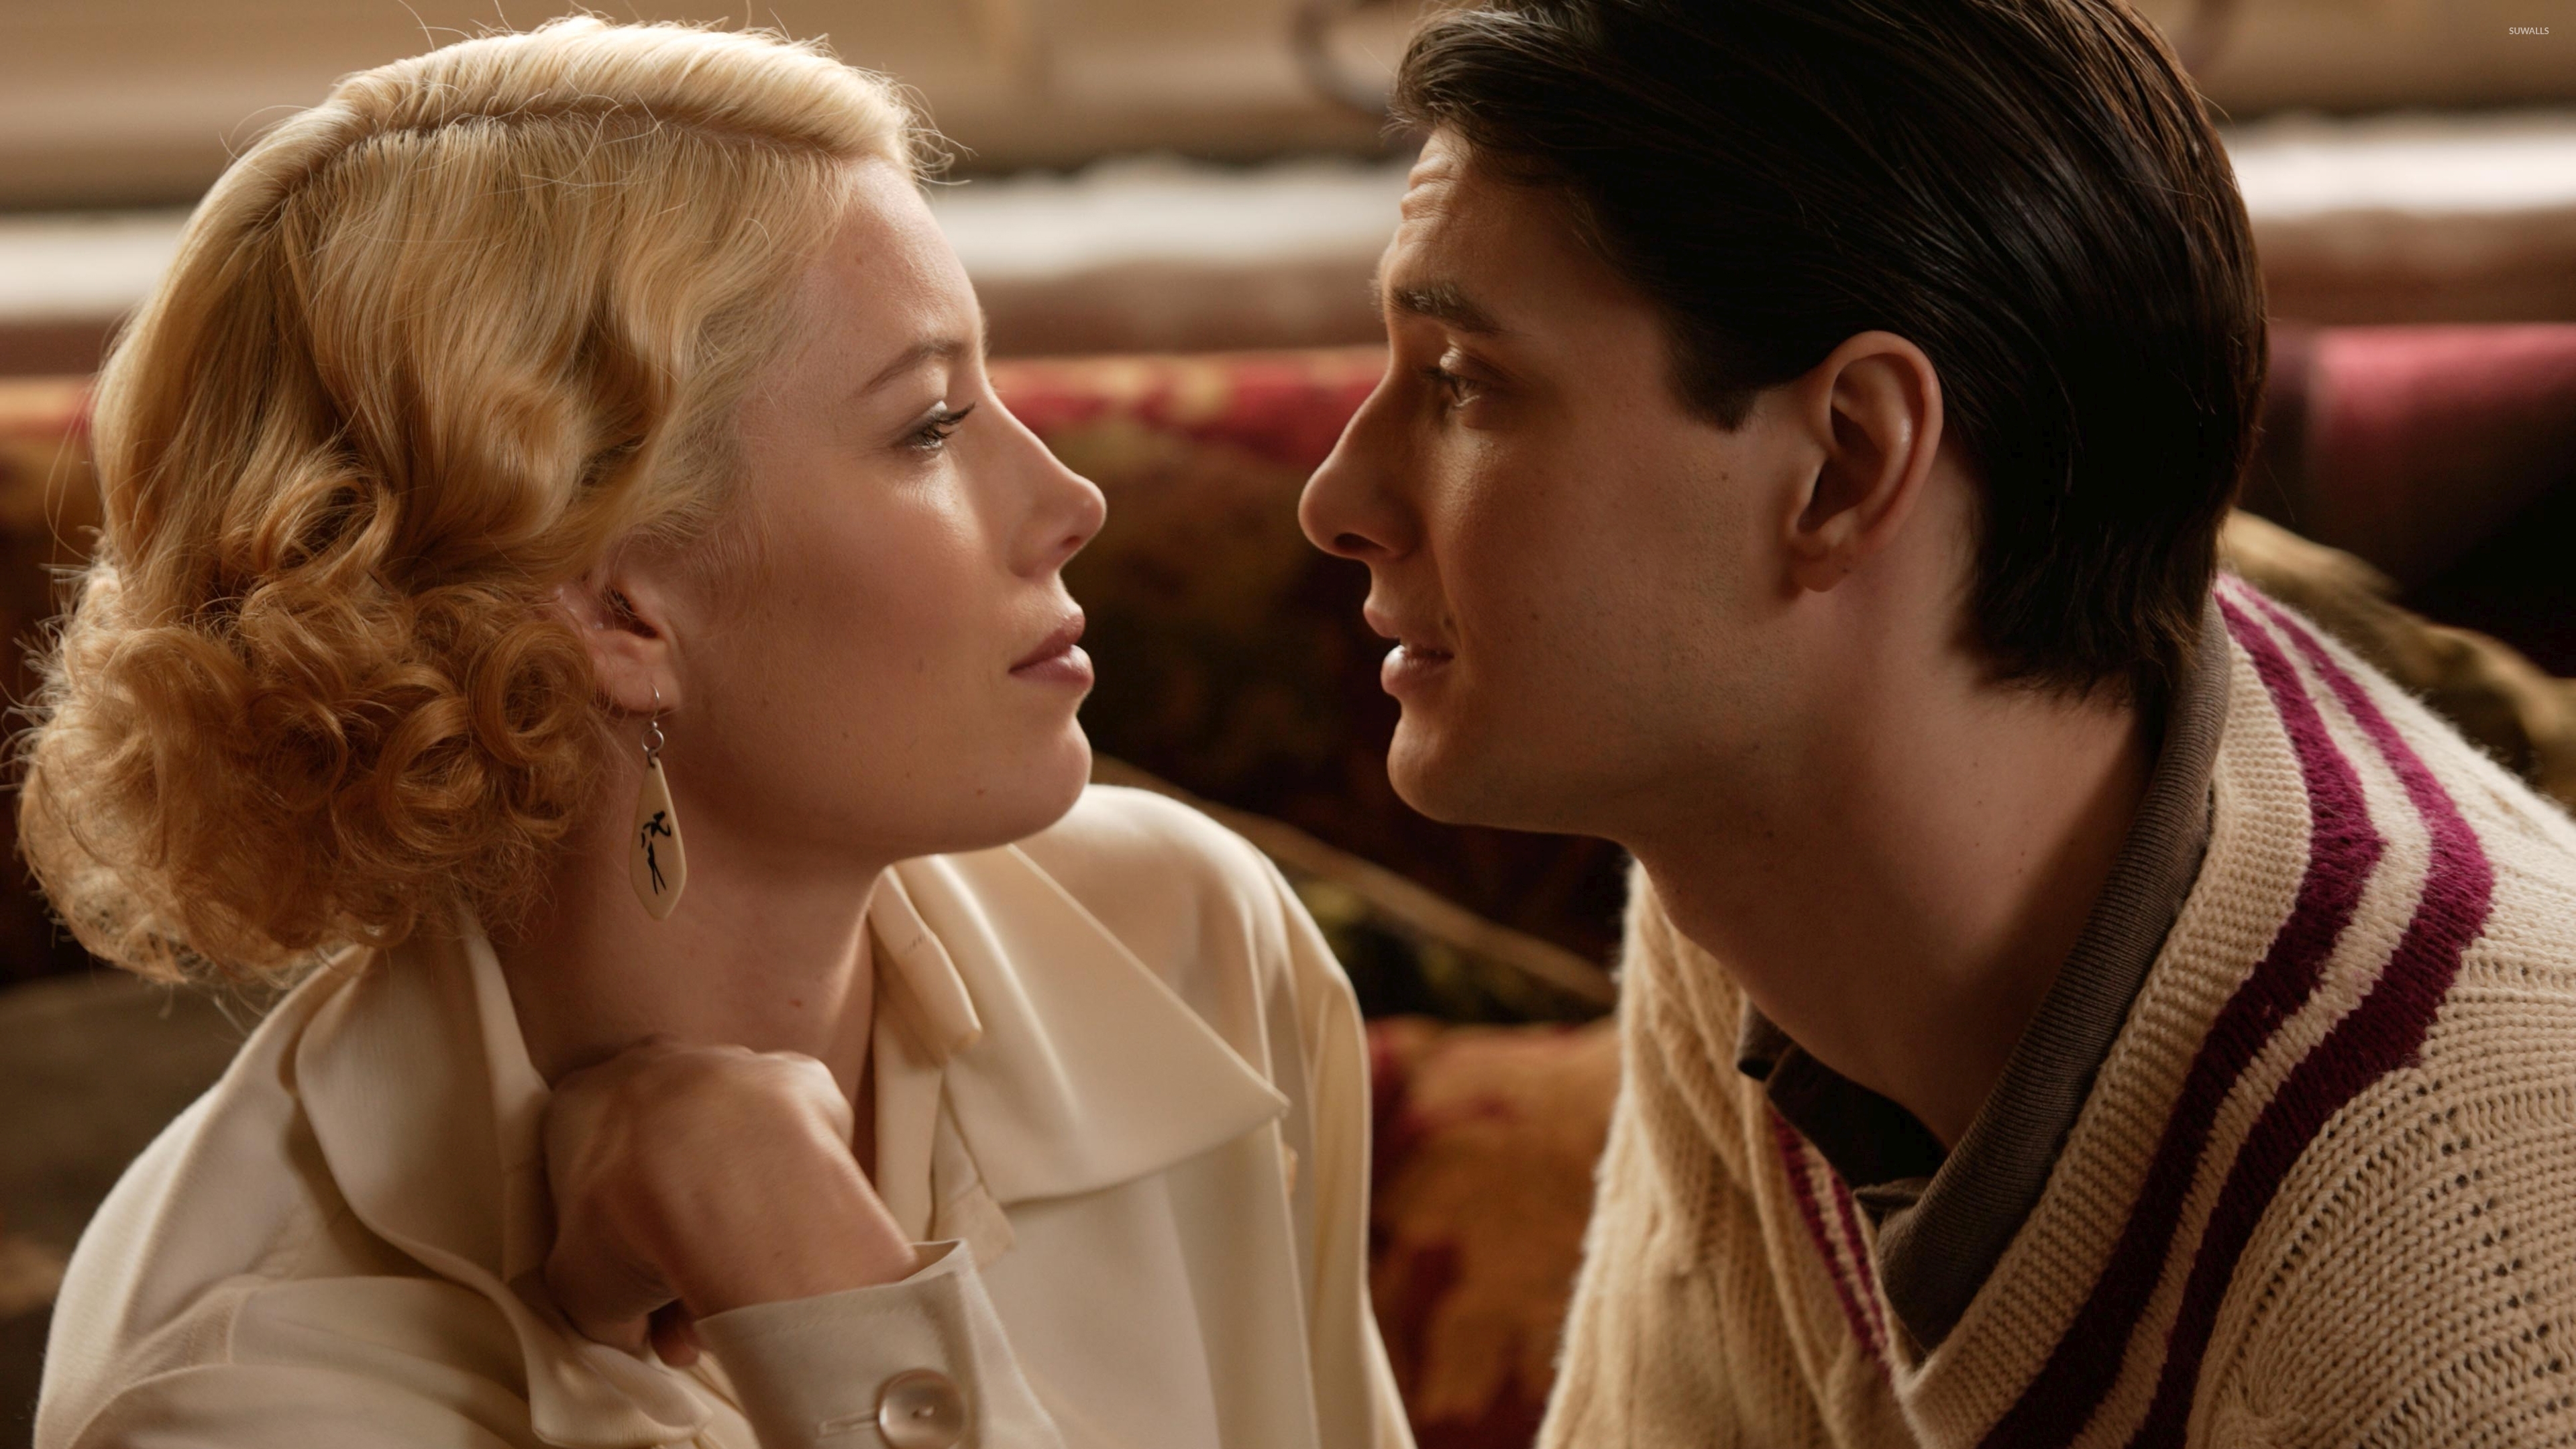 Easy Virtue Wallpapers